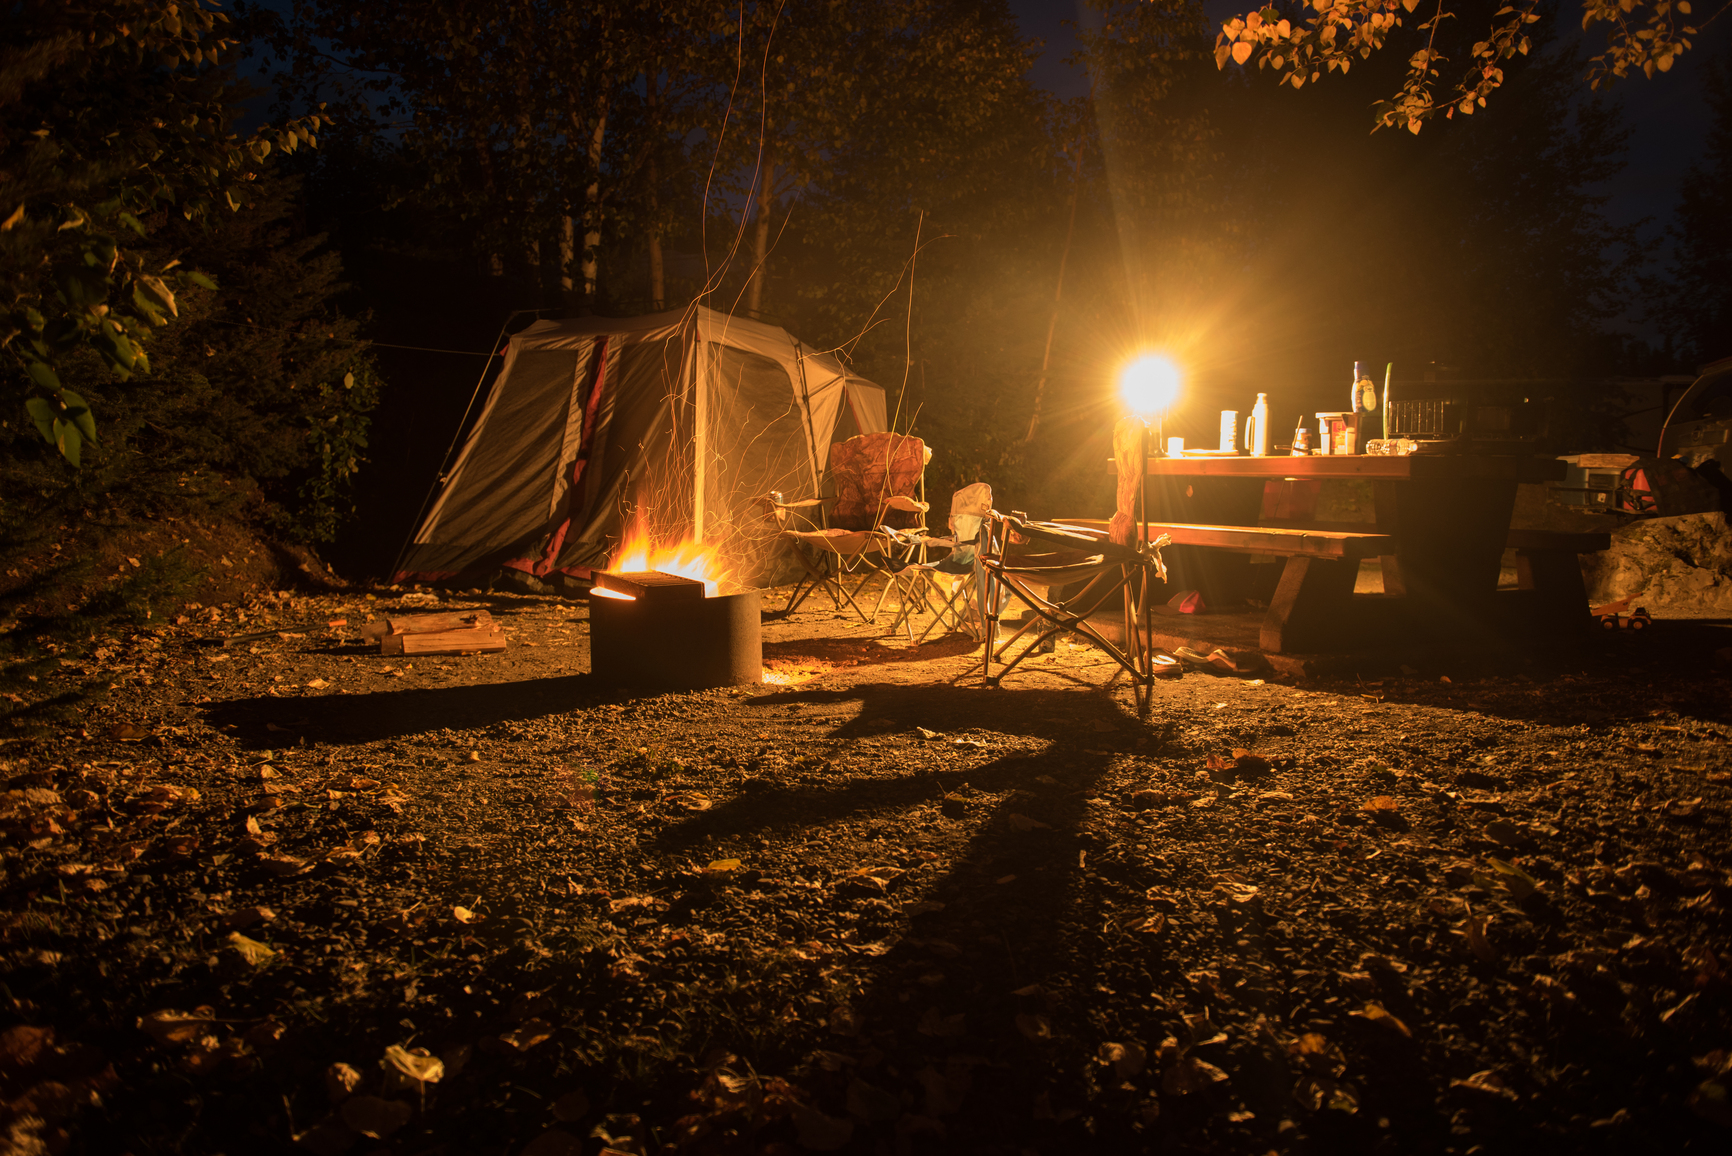 Campsite at night with a camp fire.